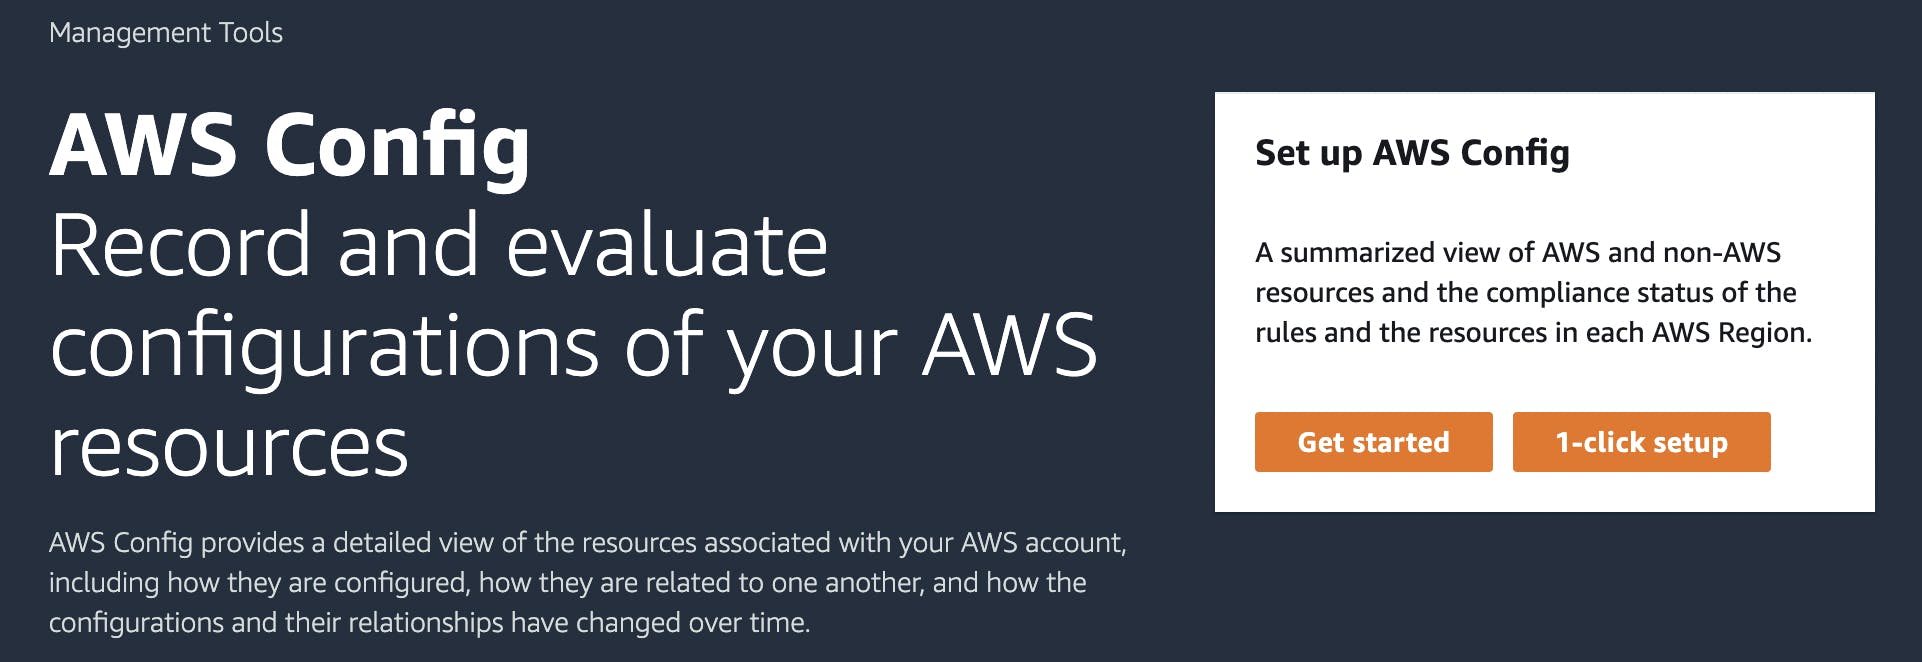 Setting up AWS Config